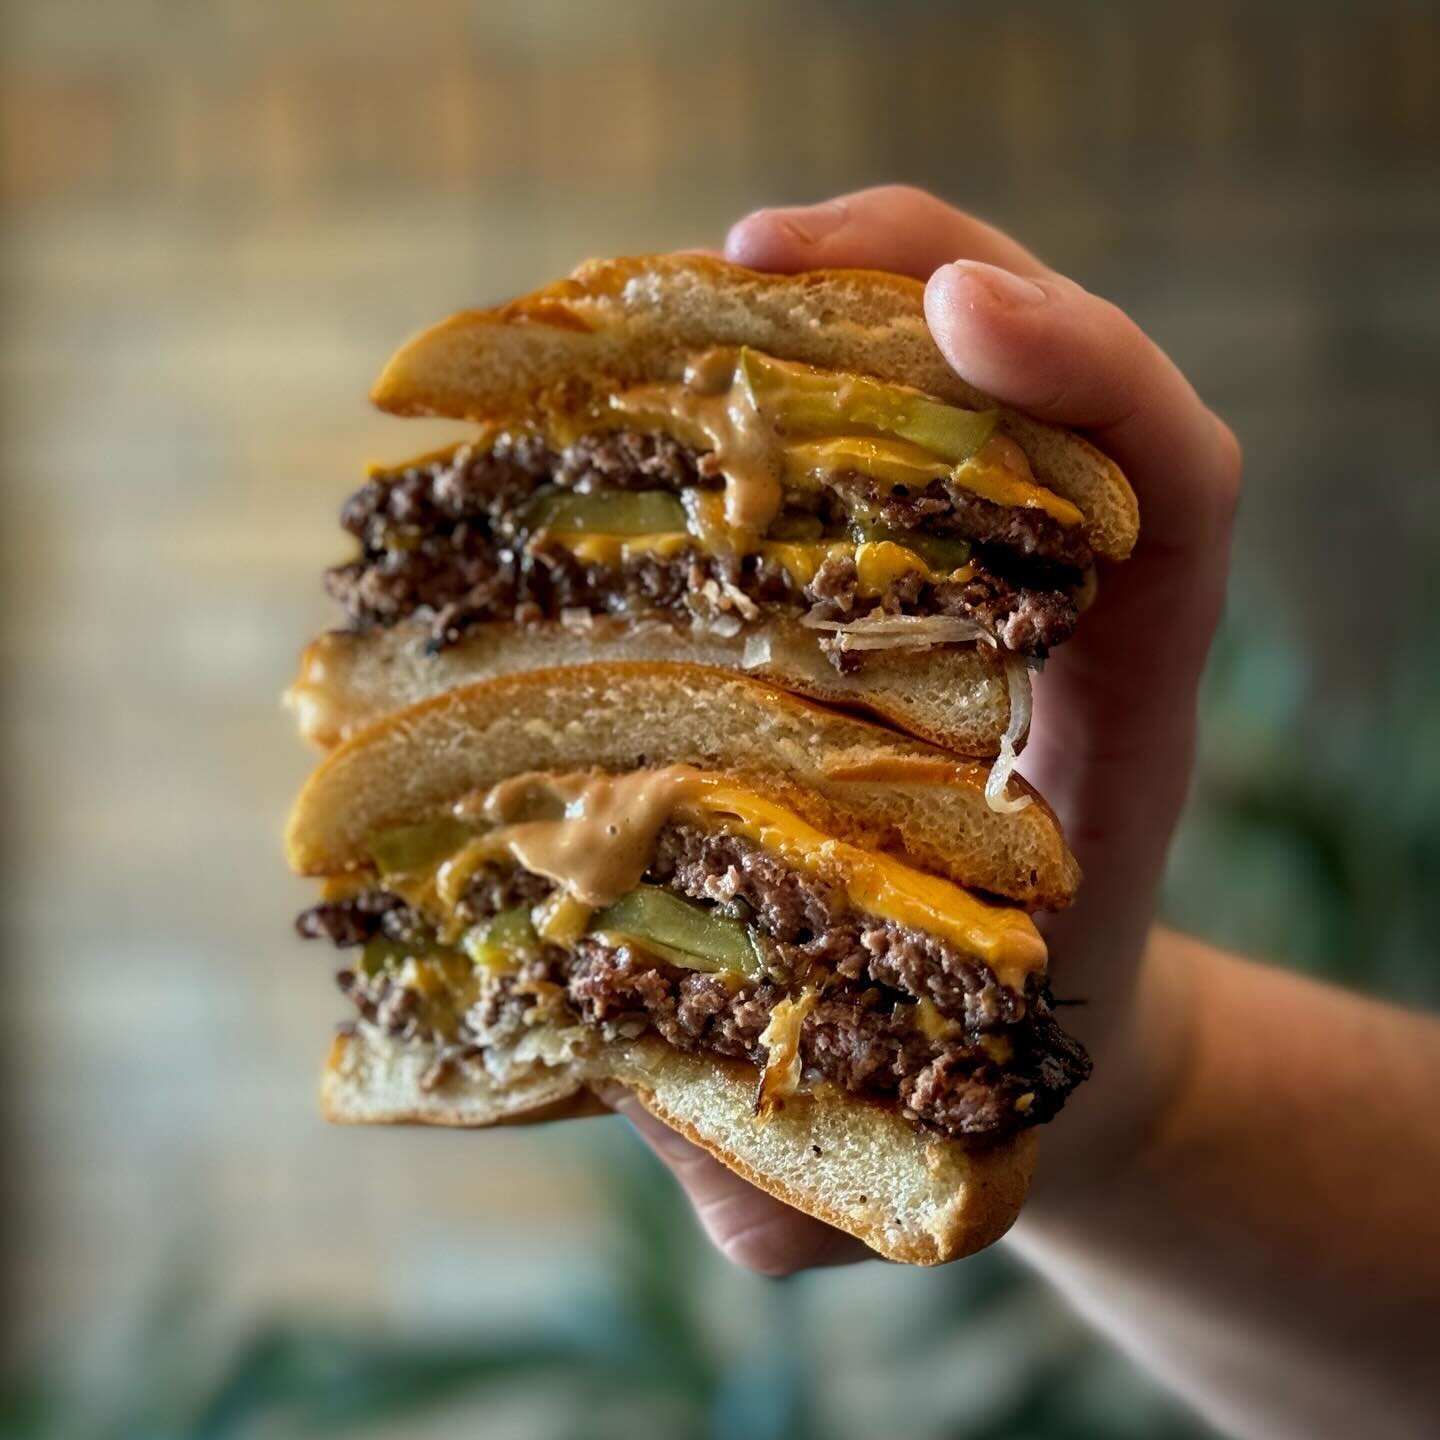 Happy Thursday! We are happy to share that our Hudson Street Burger has received a wagyu revamp!

Our Hudson Street Wagyu Burger features two wagyu beef patties, cheddar cheese, shaved onions, special sauce, and bread + butter pickles on a brioche bu